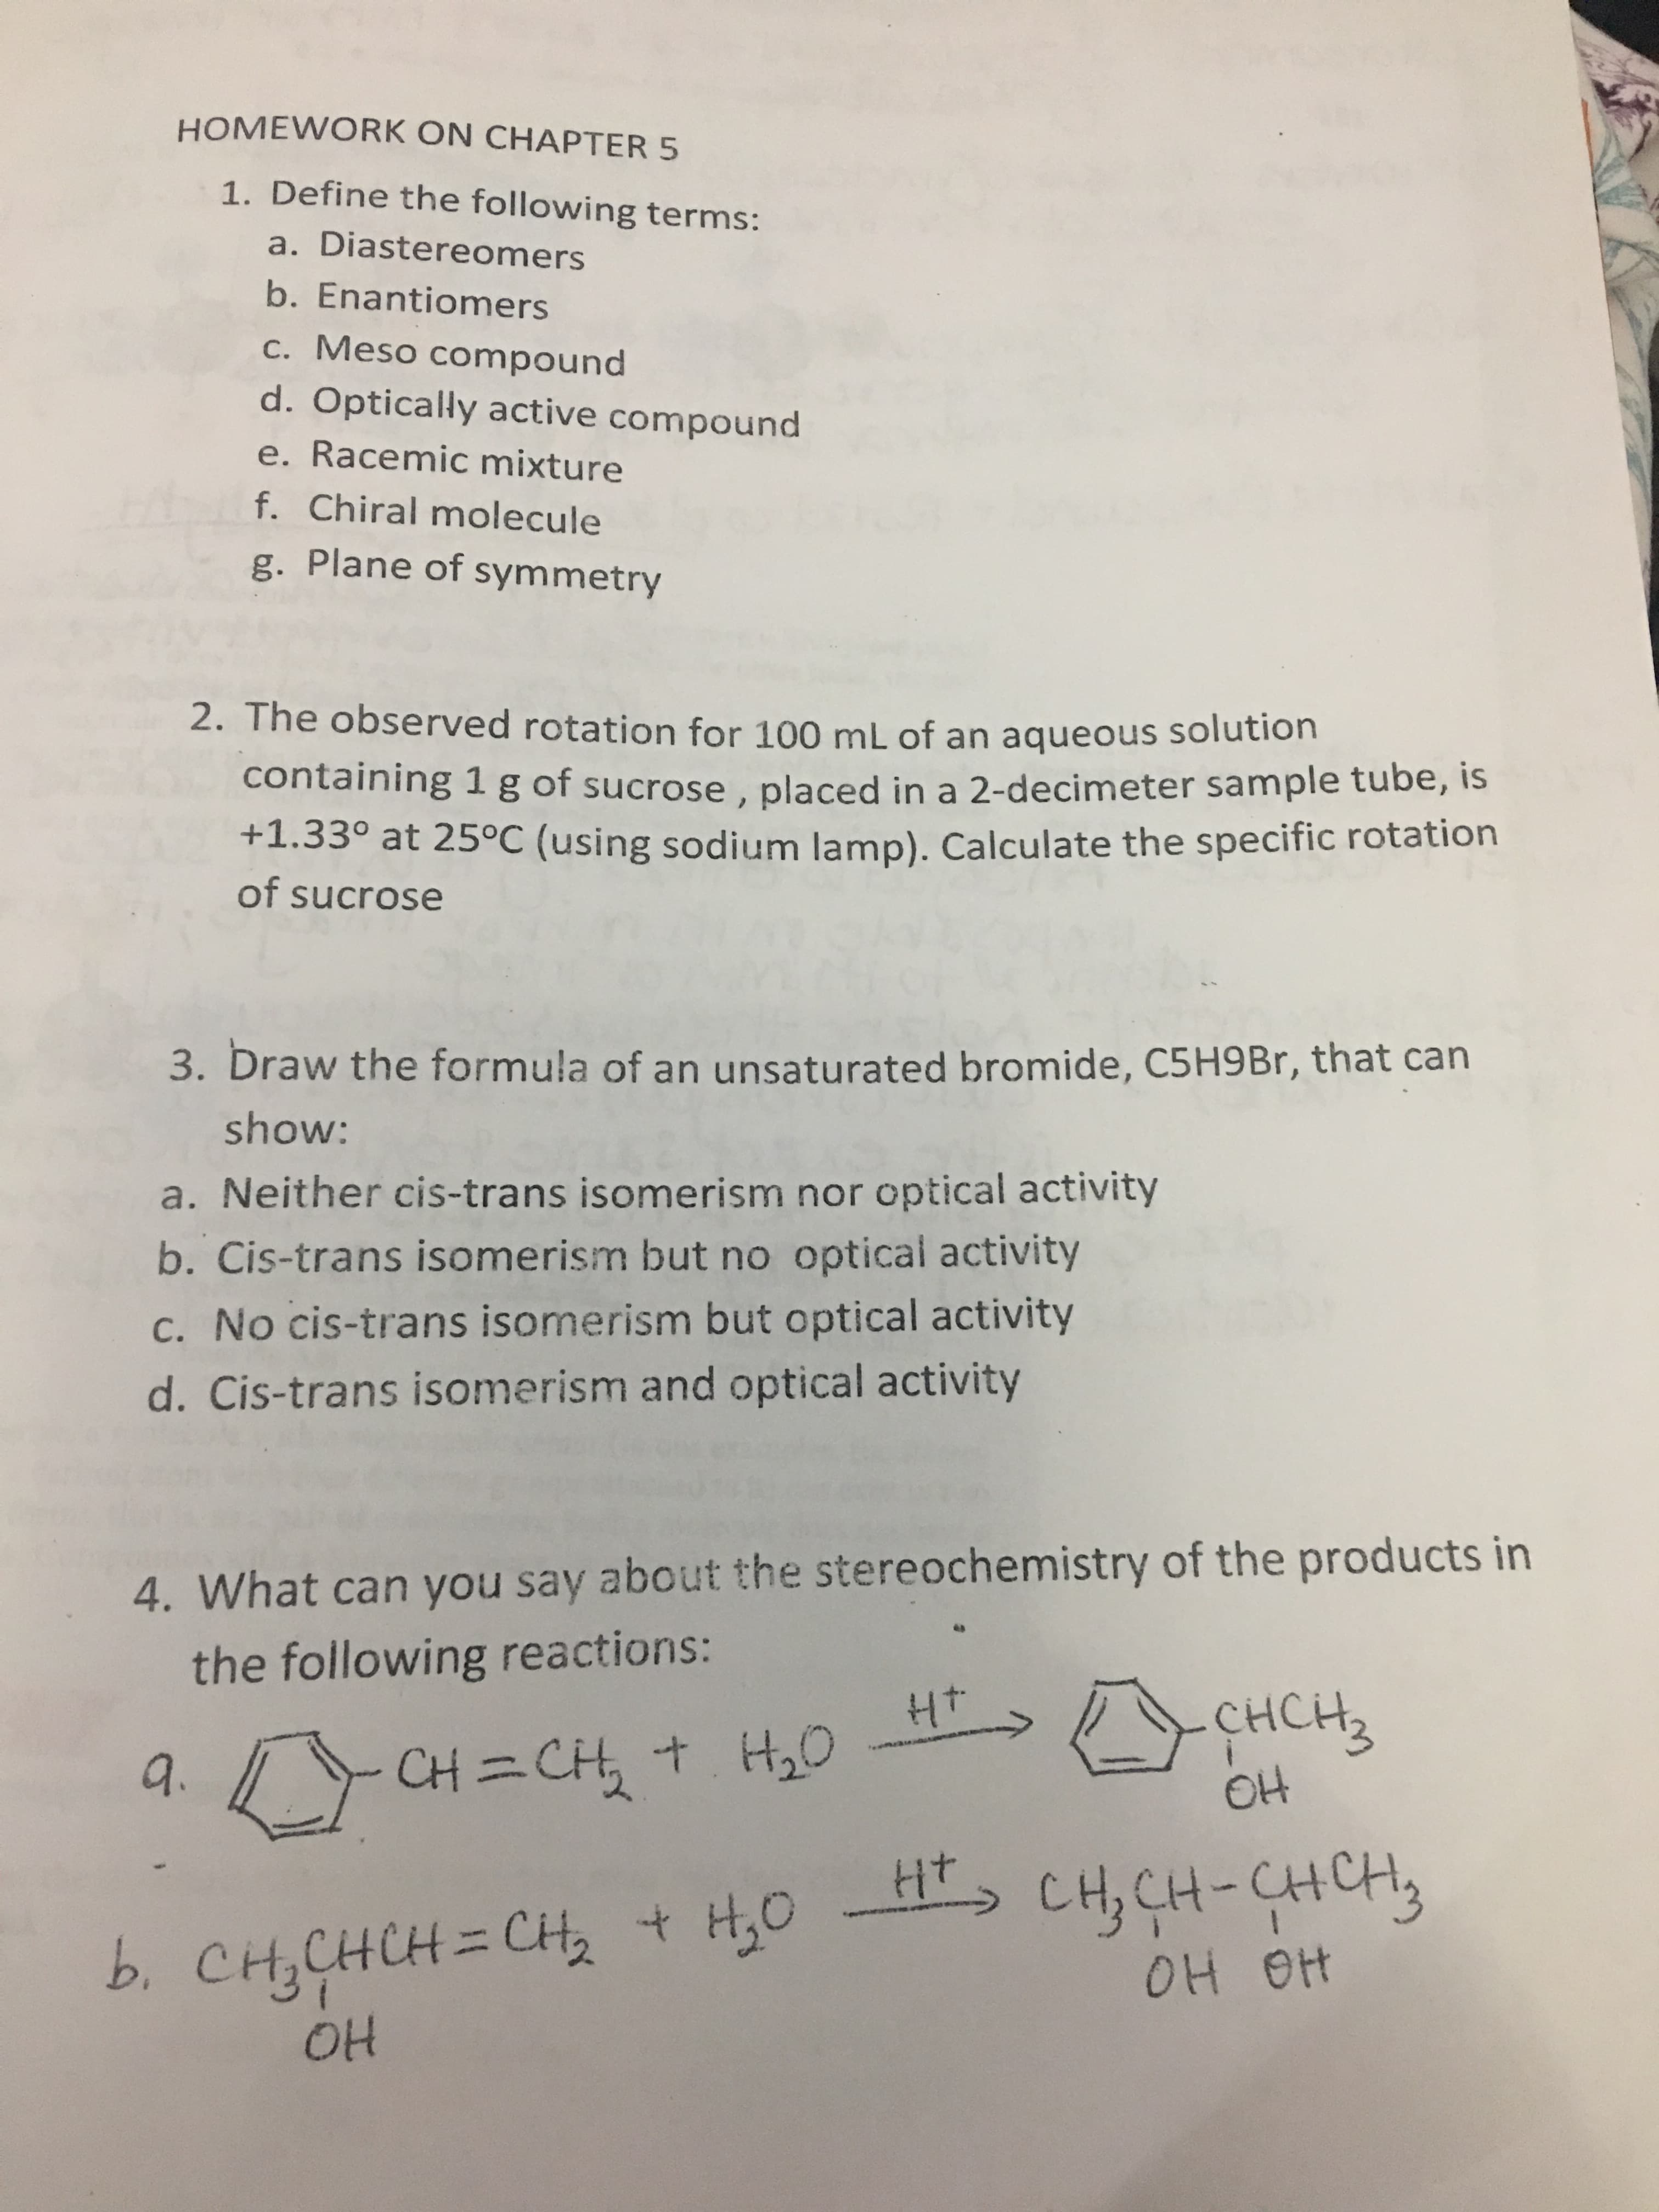 HOMEWORK ON CHAPTER 5
1. Define the following terms:
a. Diastereomers
b. Enantiomers
c. Meso compound
d. Optically active compound
e. Racemic mixture
f. Chiral molecule
g. Plane of symmetry
2. The observed rotation for 100 mL of an aqueous solution
containing 1g of sucrose, placed in a 2-decimeter sample tube, is
+1.33° at 25°C (using sodium lamp). Calculate the specific rotation
of sucrose
3. Draw the formula of an unsaturated bromide, C5H9 Br, that can
show:
a. Neither cis-trans isomerism nor optical activity
b. Cis-trans isomerism but no optical activity
c. No cis-trans isomerism but optical activity
d. Cis-trans isomerism and optical activity
4. What can you say about the stereochemistry of the products in
the following reactions:
- снсн,
O4
Ht
CH=CH, t H,0
9.
Ht CH,CH-CHCH
b. CHCHCH= Ct
OH
+
OH Ot
